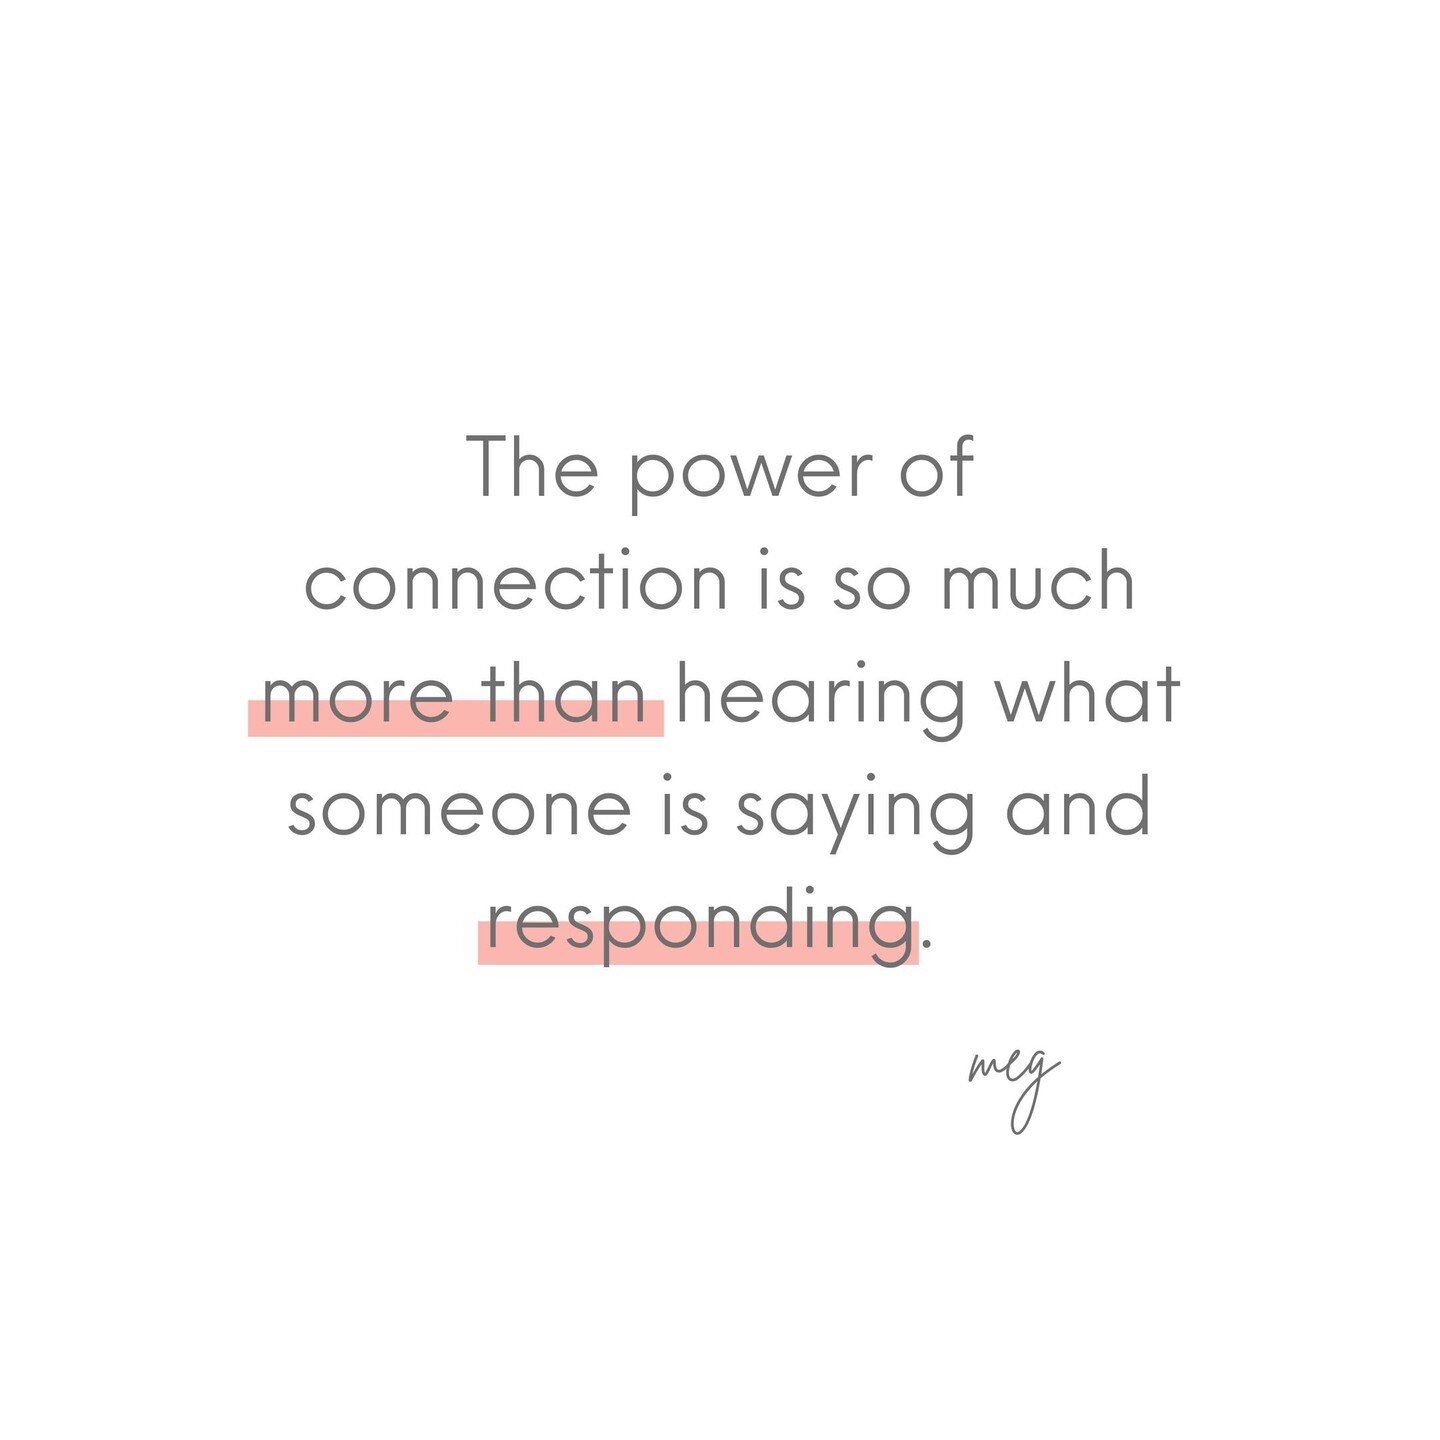 Whether you are a person or a brand, or building a personal brand, this statement is true for every relationship you are creating. ⁠
⁠
So often people listen to respond without really hearing and connecting with what someone else is saying, and, well